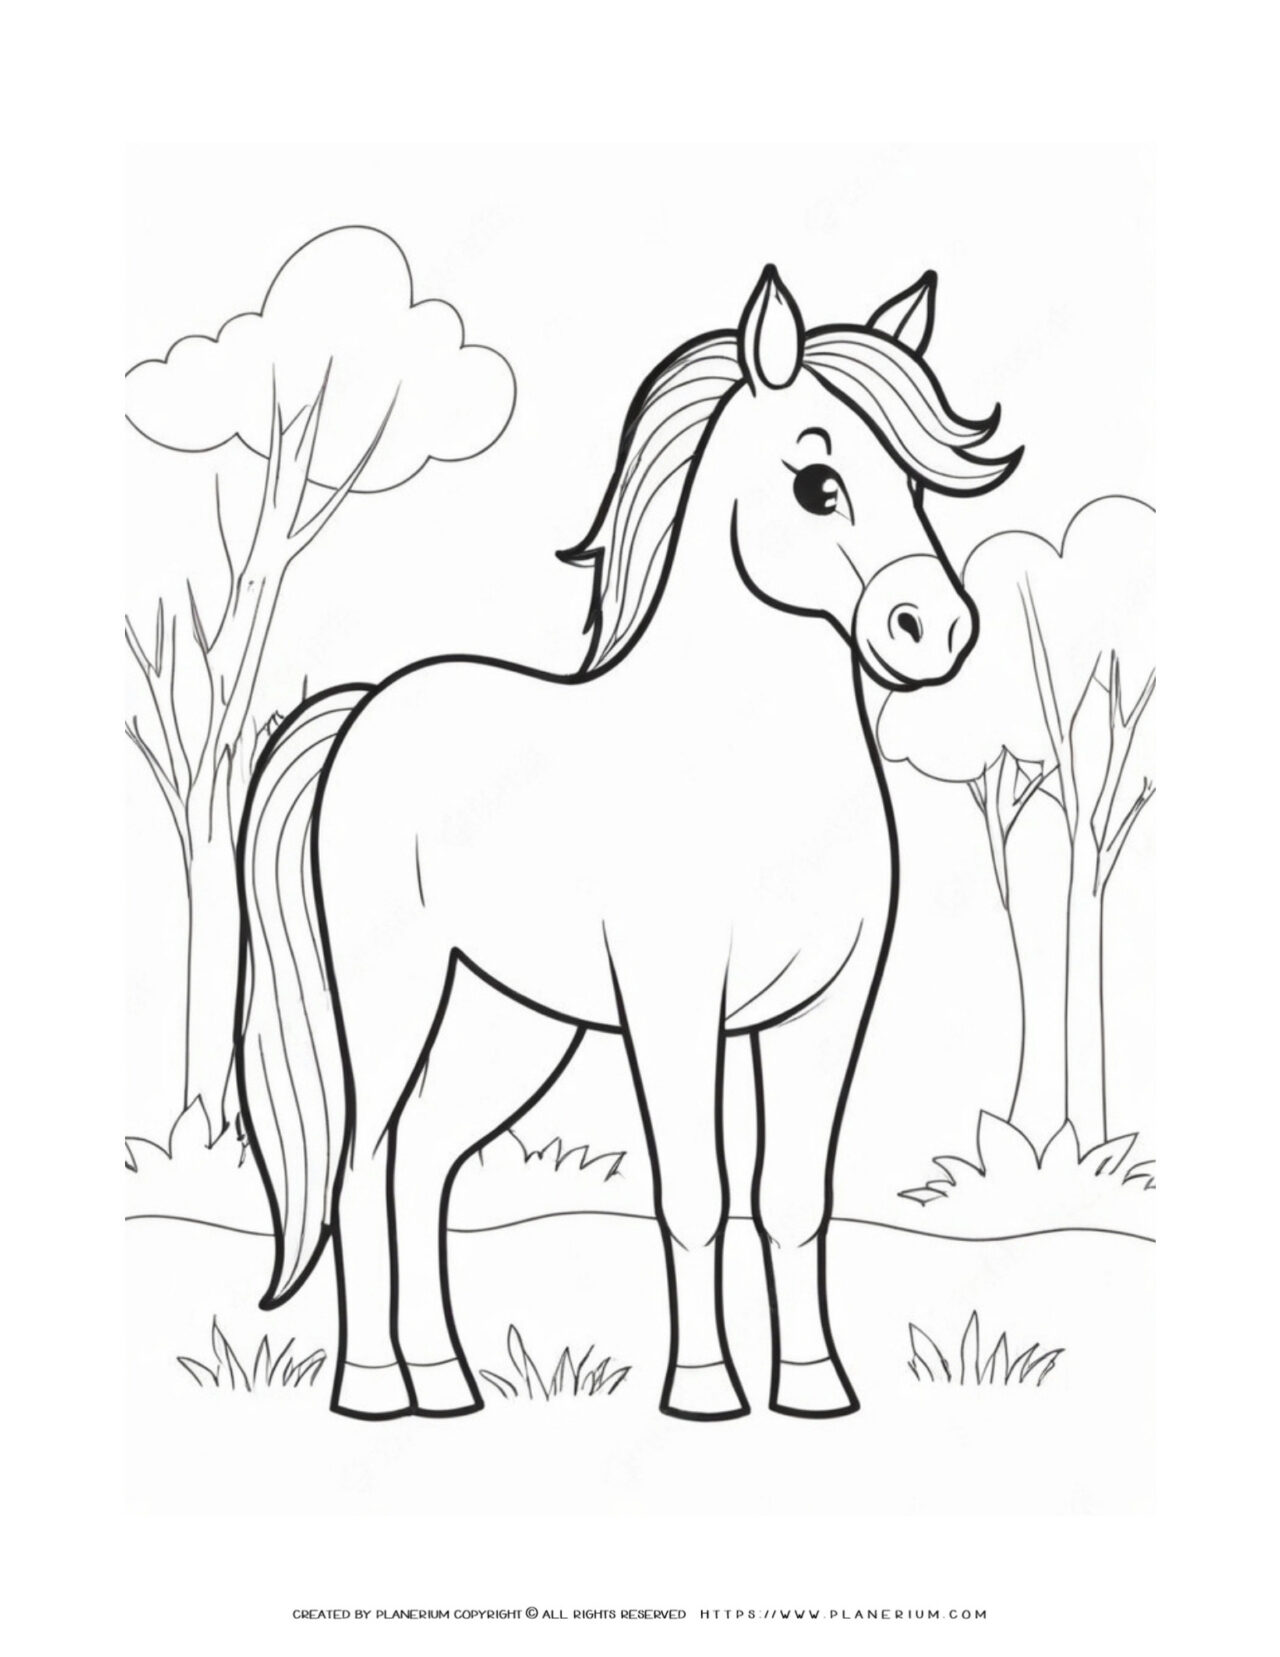 Horse-Standing-Trees-Grass-Coloring-Page